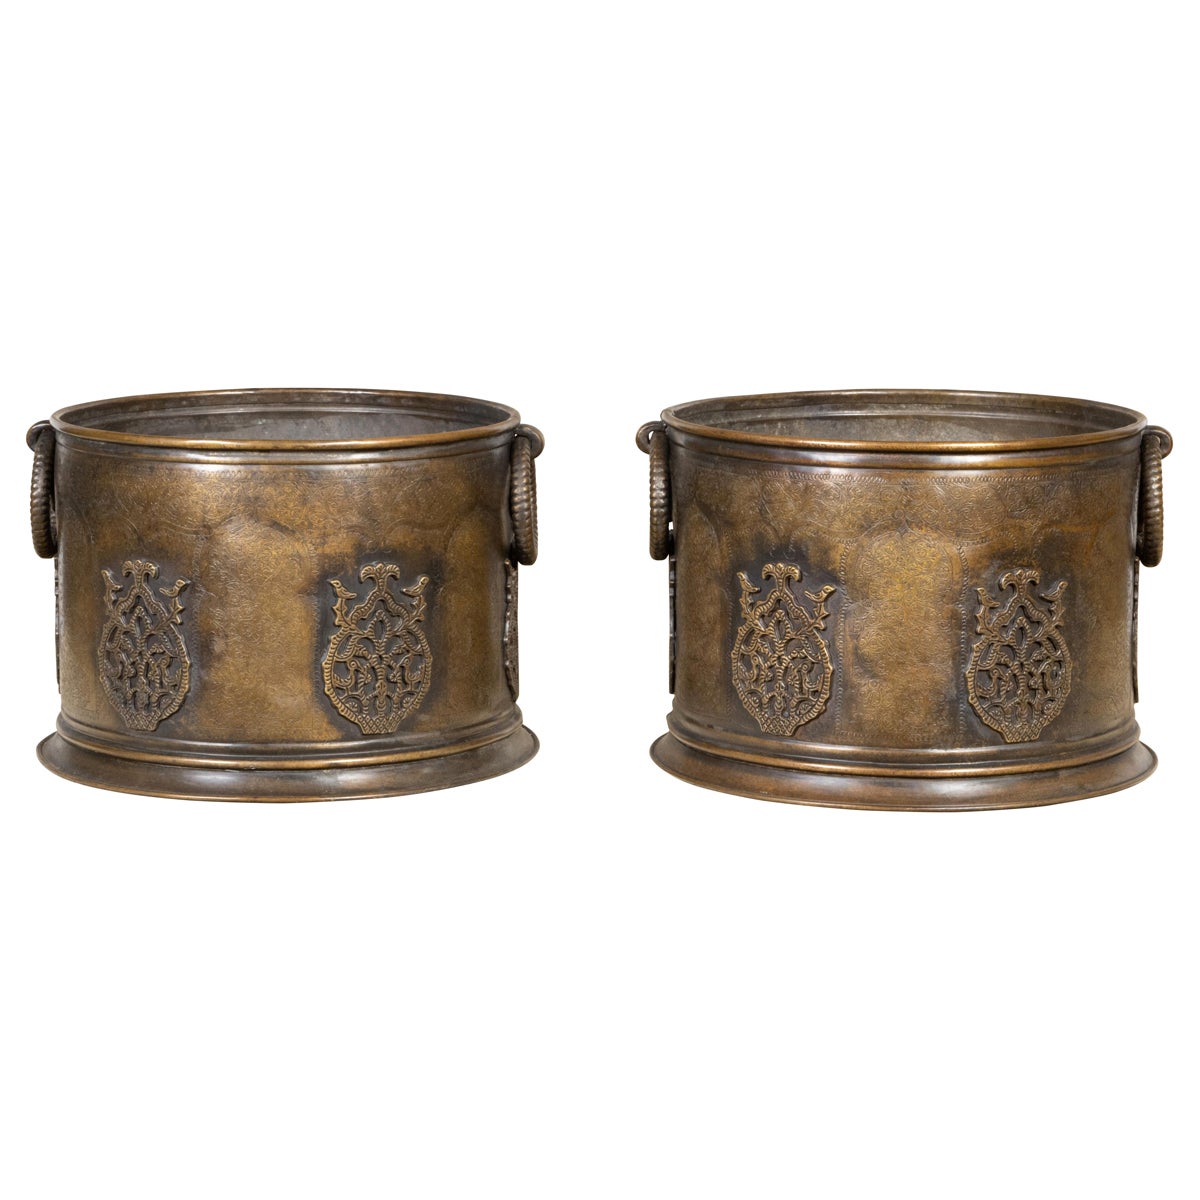 Pair of English 1920s Copper Cache-Pot Planters with Etched Foliage Decor For Sale